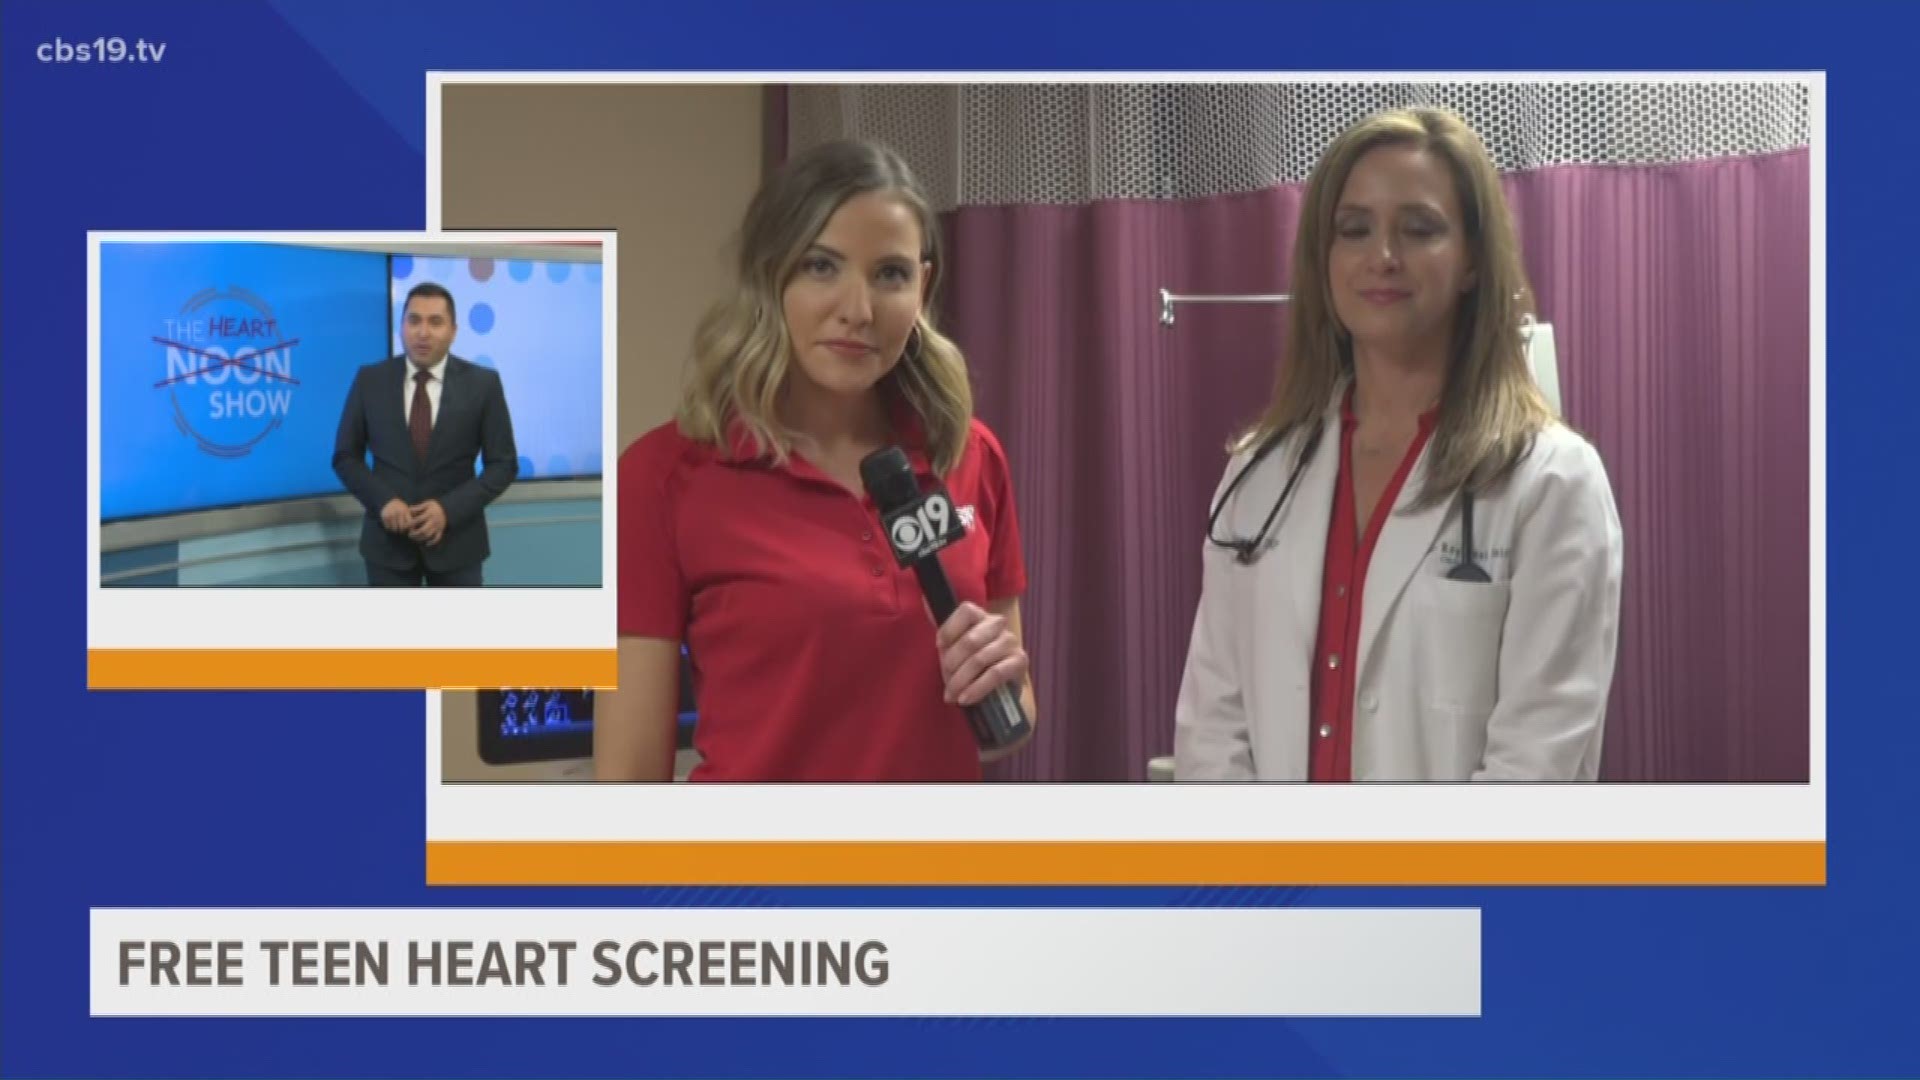 1 in 250 students are at risk for sudden cardiac death related issues, according to Longview Regional Medical Center.